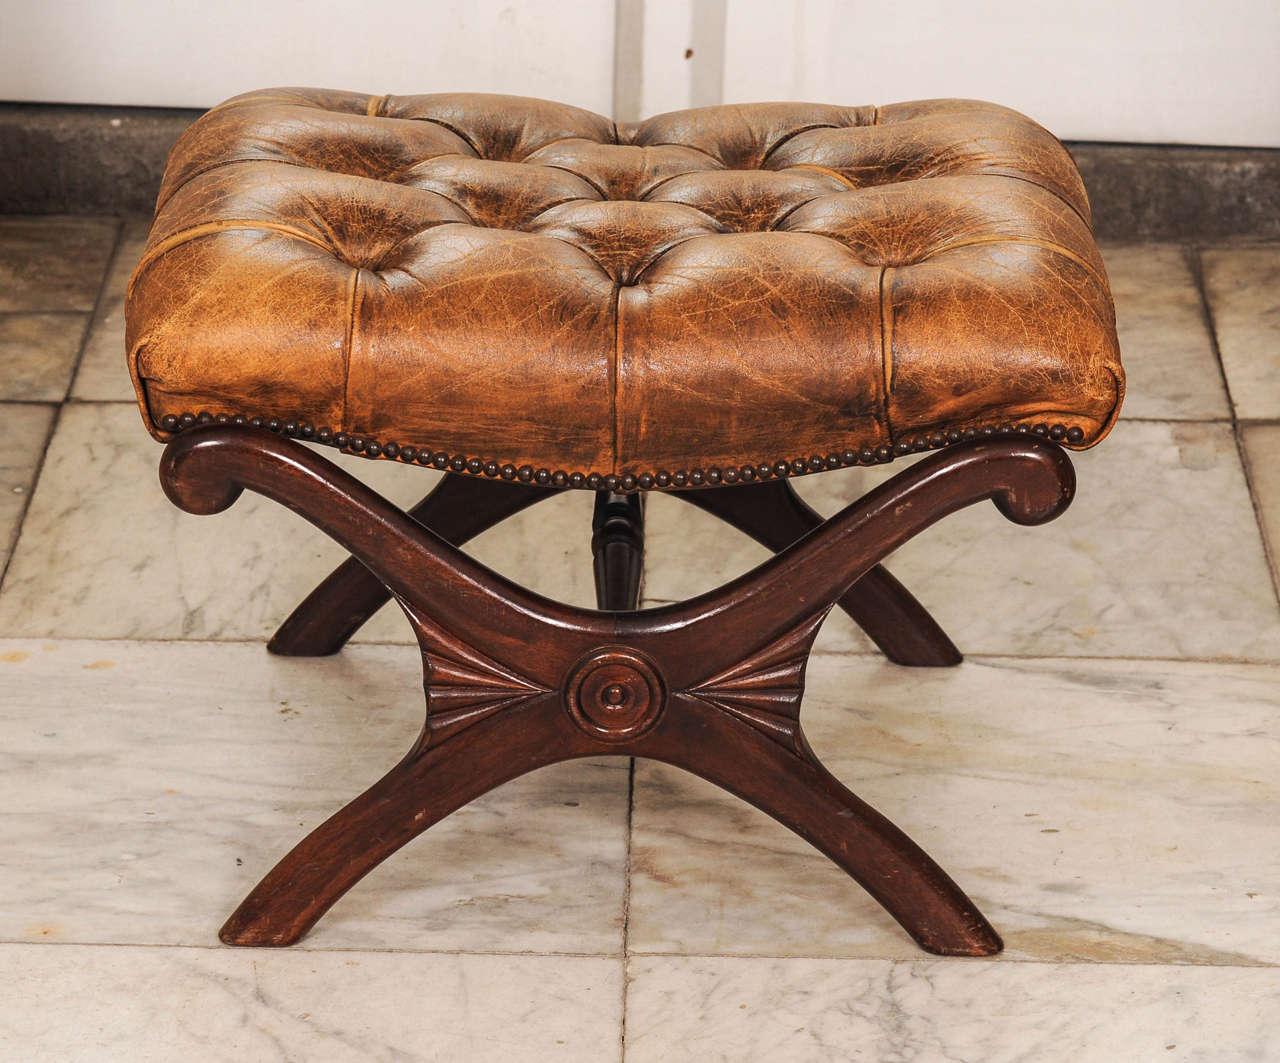 A pair of English Regency-style mahogany and stools or taborets with leather upholstered.